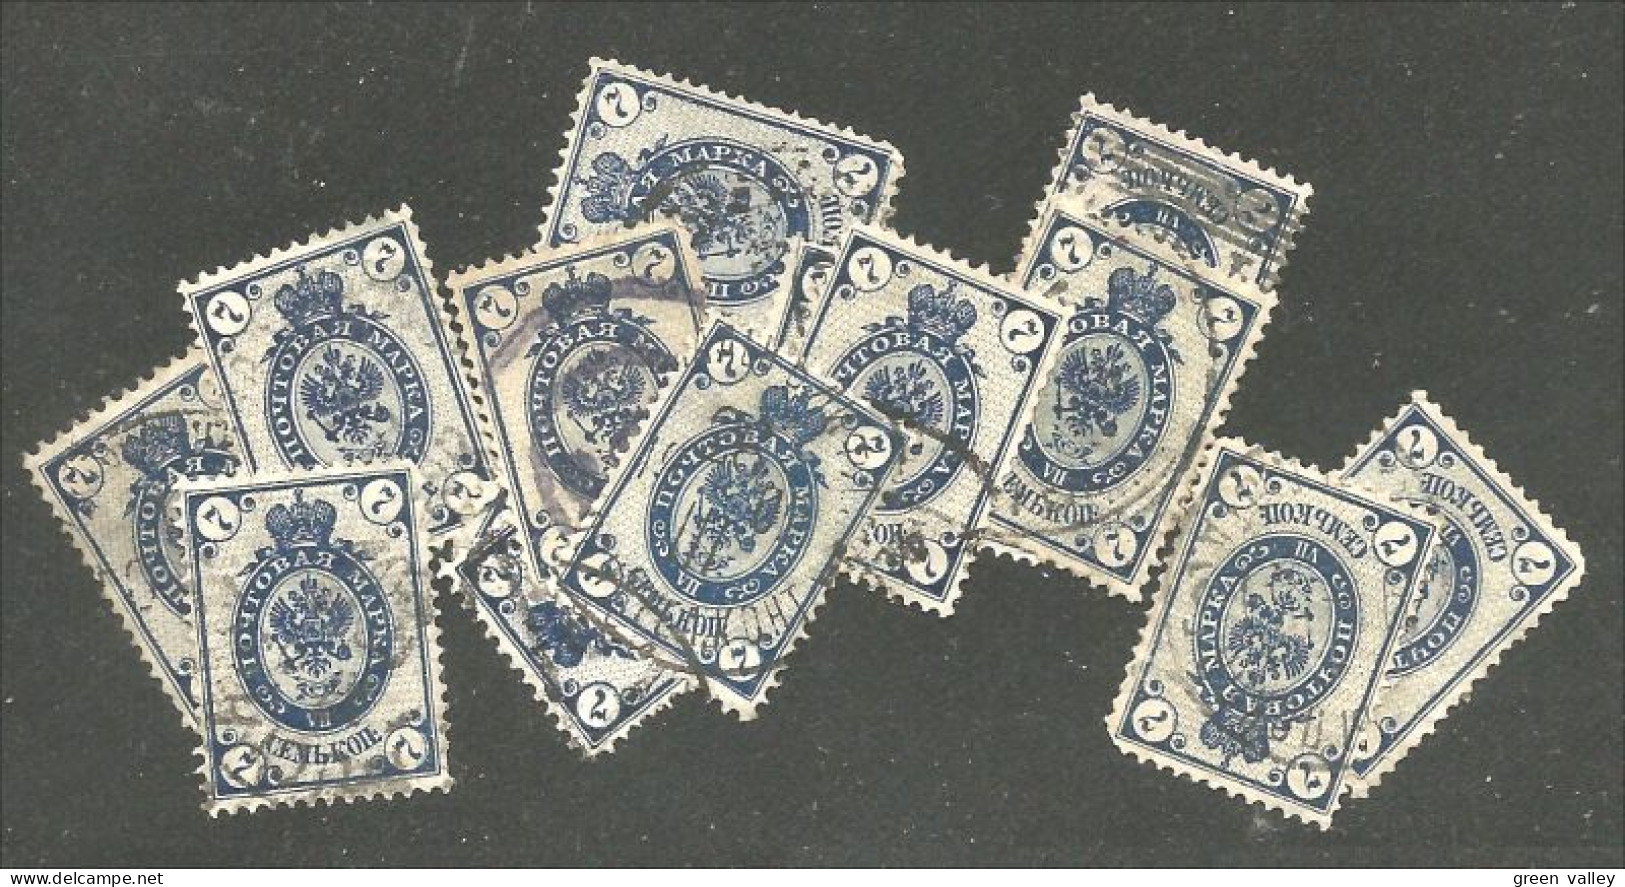 771 Russie 7k 1889 Blue 35+ Stamps For Study Aigle Imperial Eagle Post Horn Cor Postal (RUZ-341) - Usati